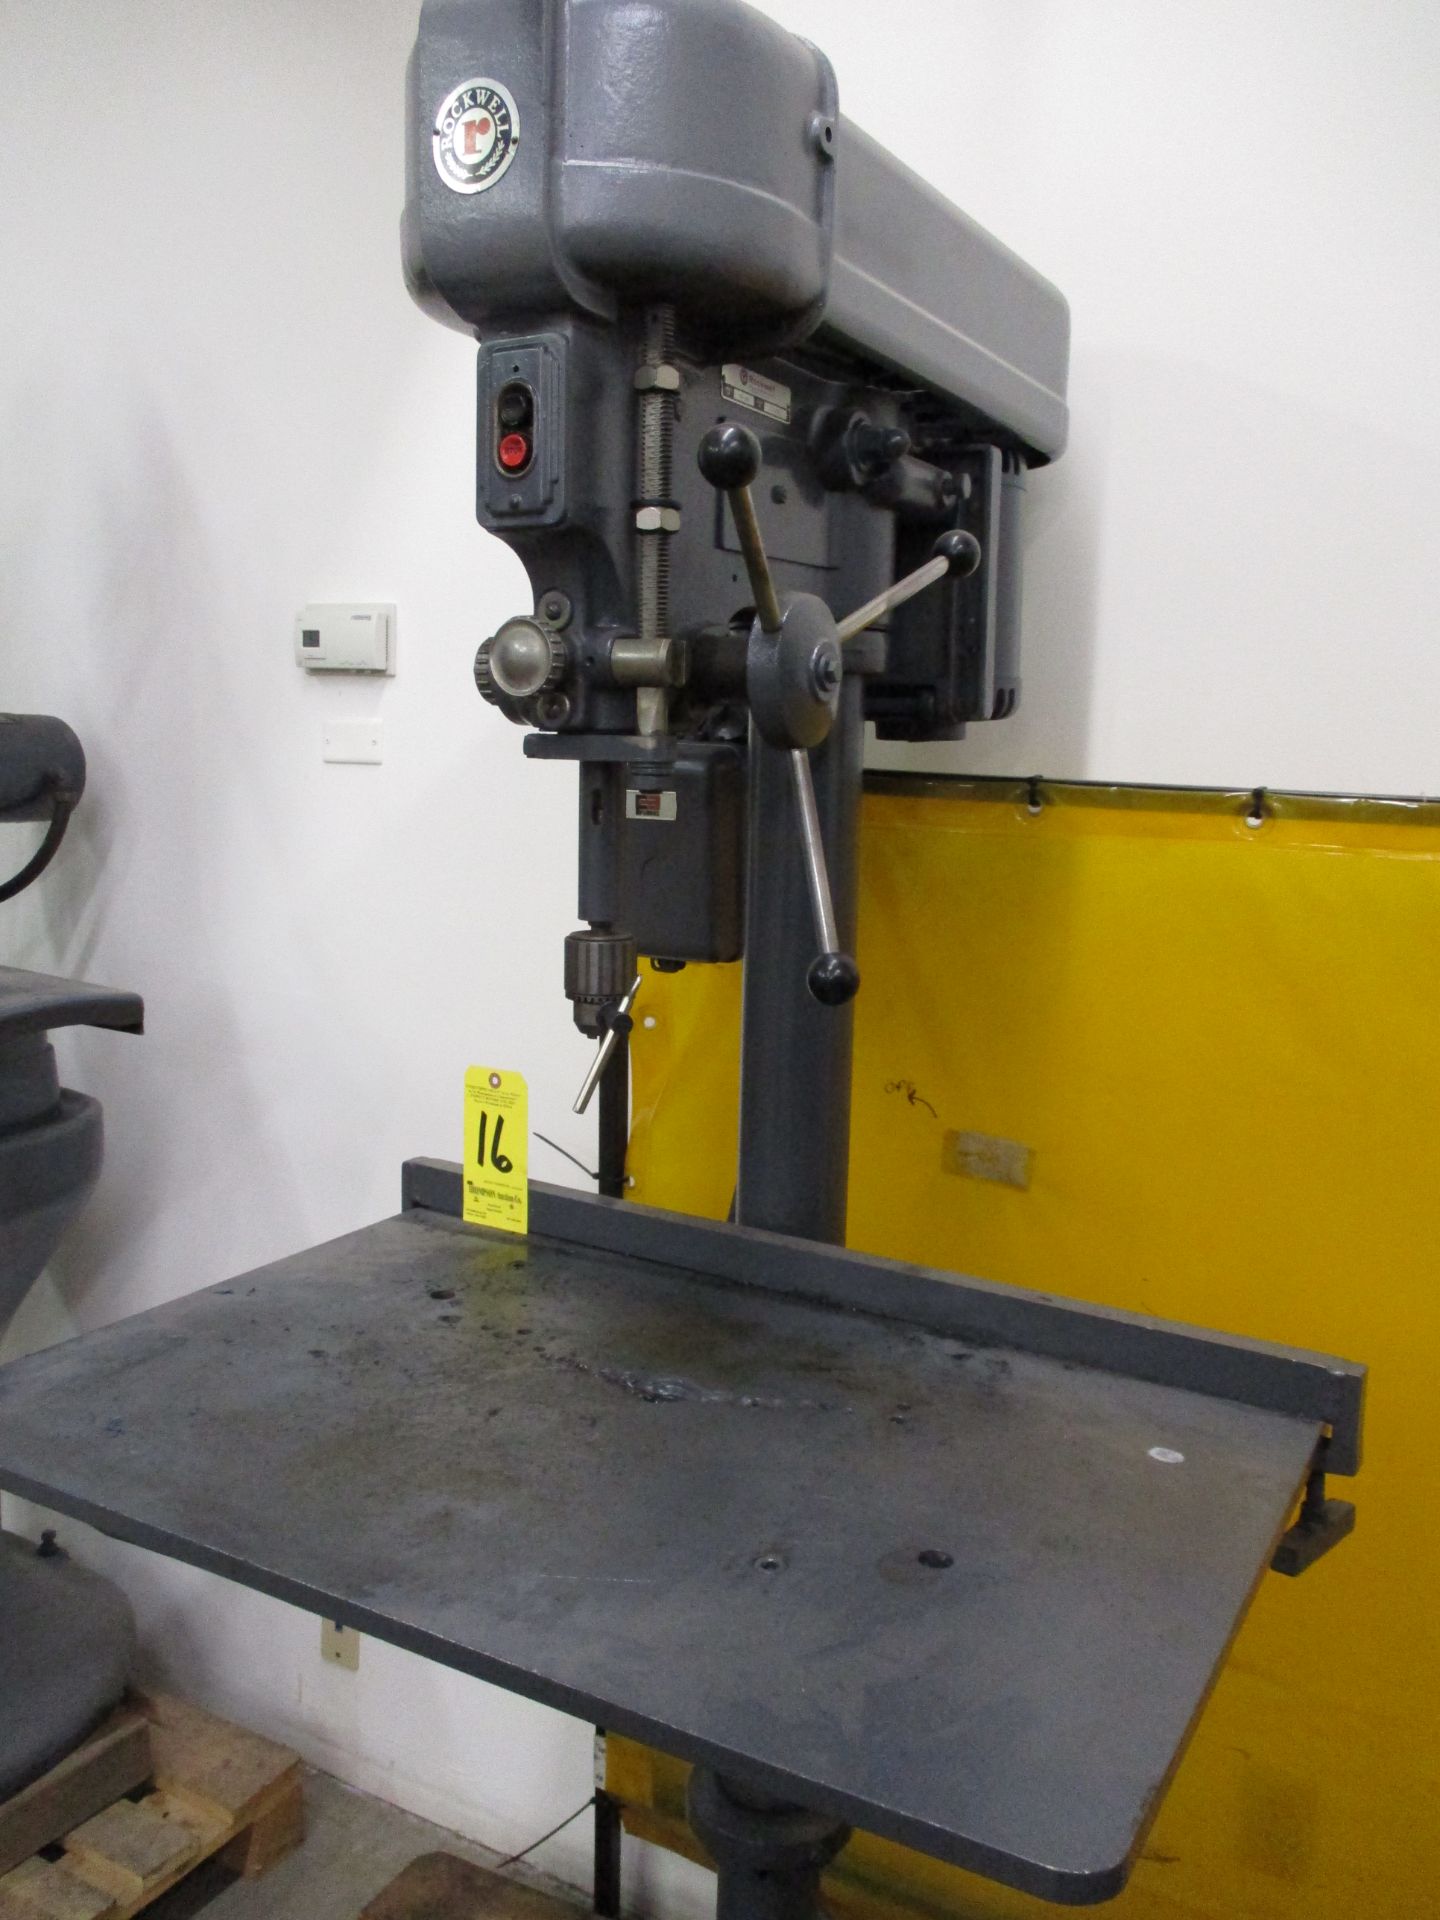 Rockwell Model 70-400, 20" Step Pulley Drill Press, s/n 1465585, 2 MT Spindle, 3 Phase